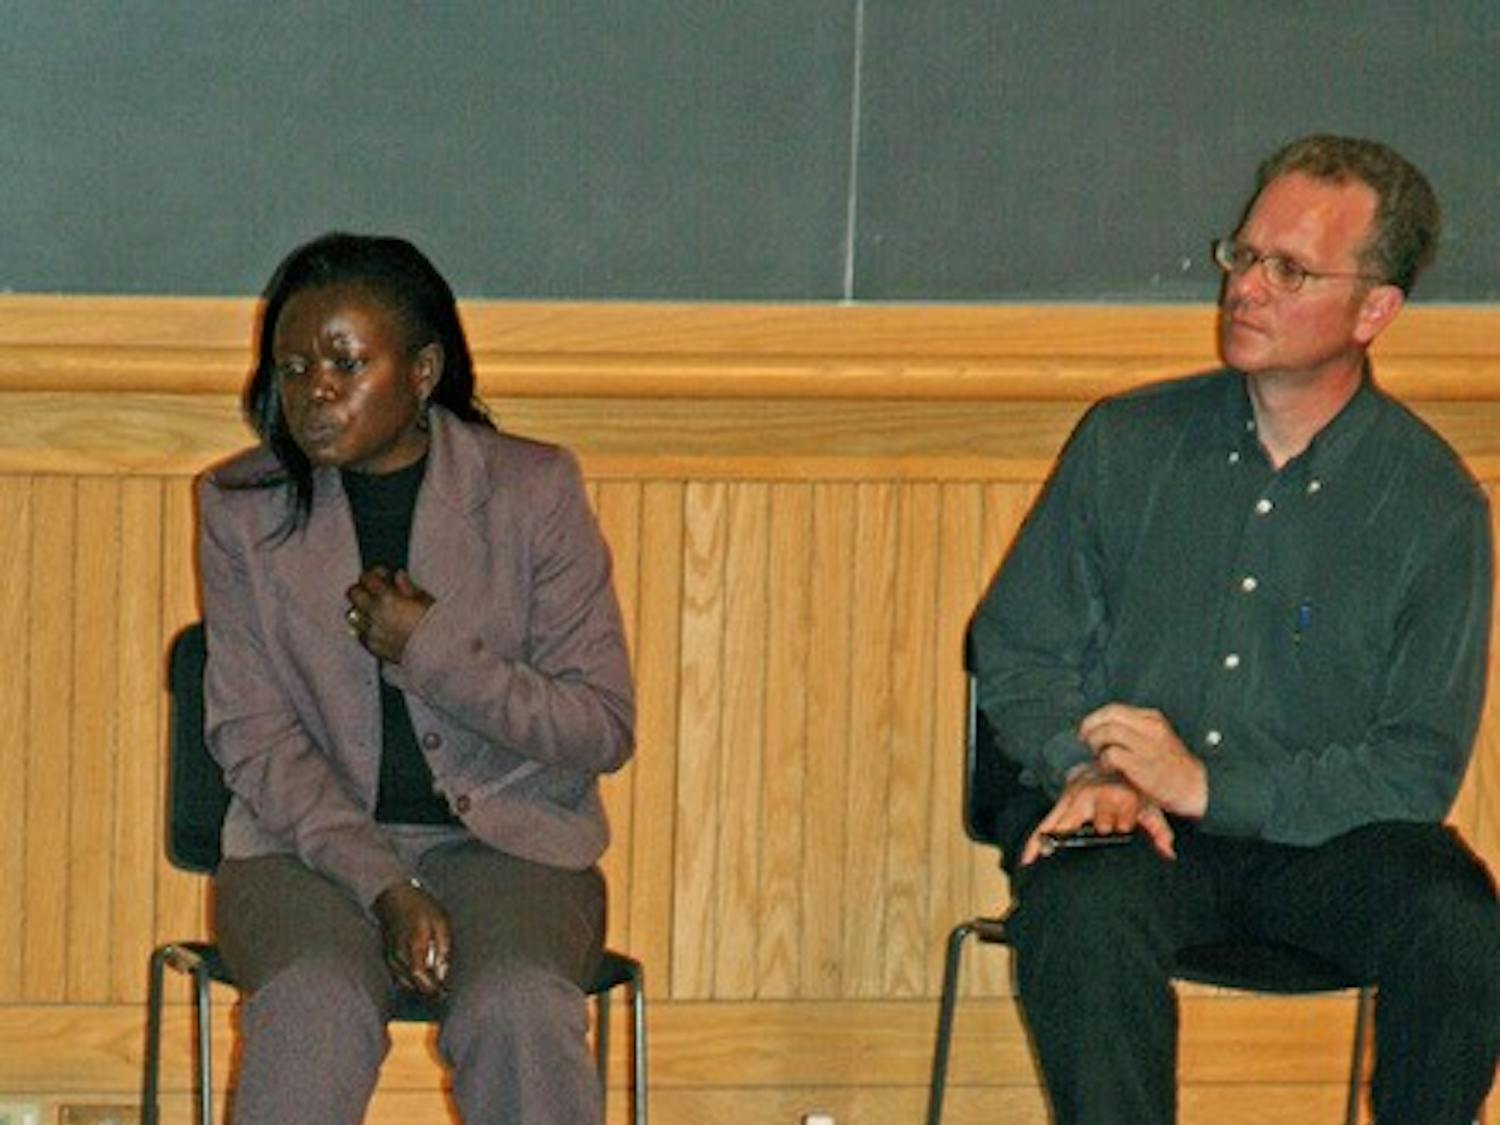 Ugandan AIDS activist Beatrice Were took questions from the audience after her speech Thursday evening in Rockefeller Forum.